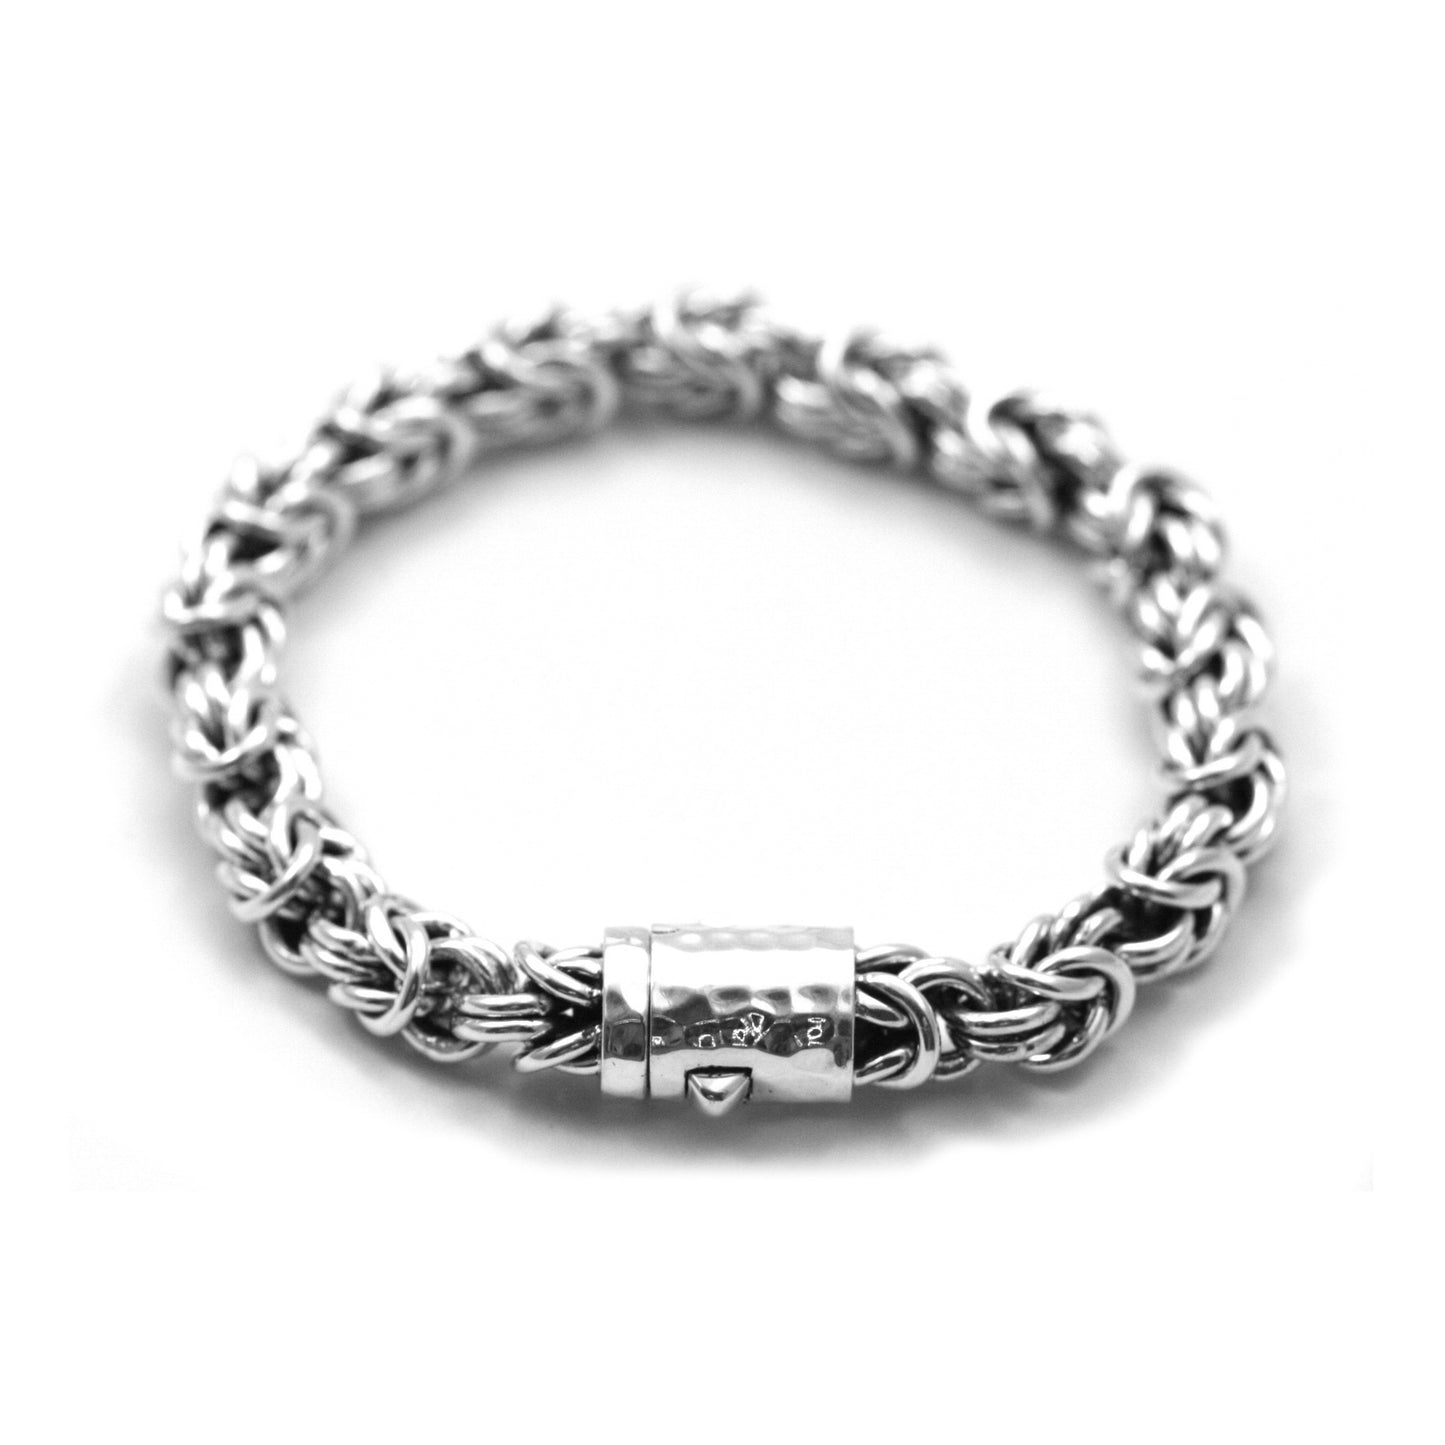 Silver bracelet made of open link byzantine chain with a hammered barrel clasp.